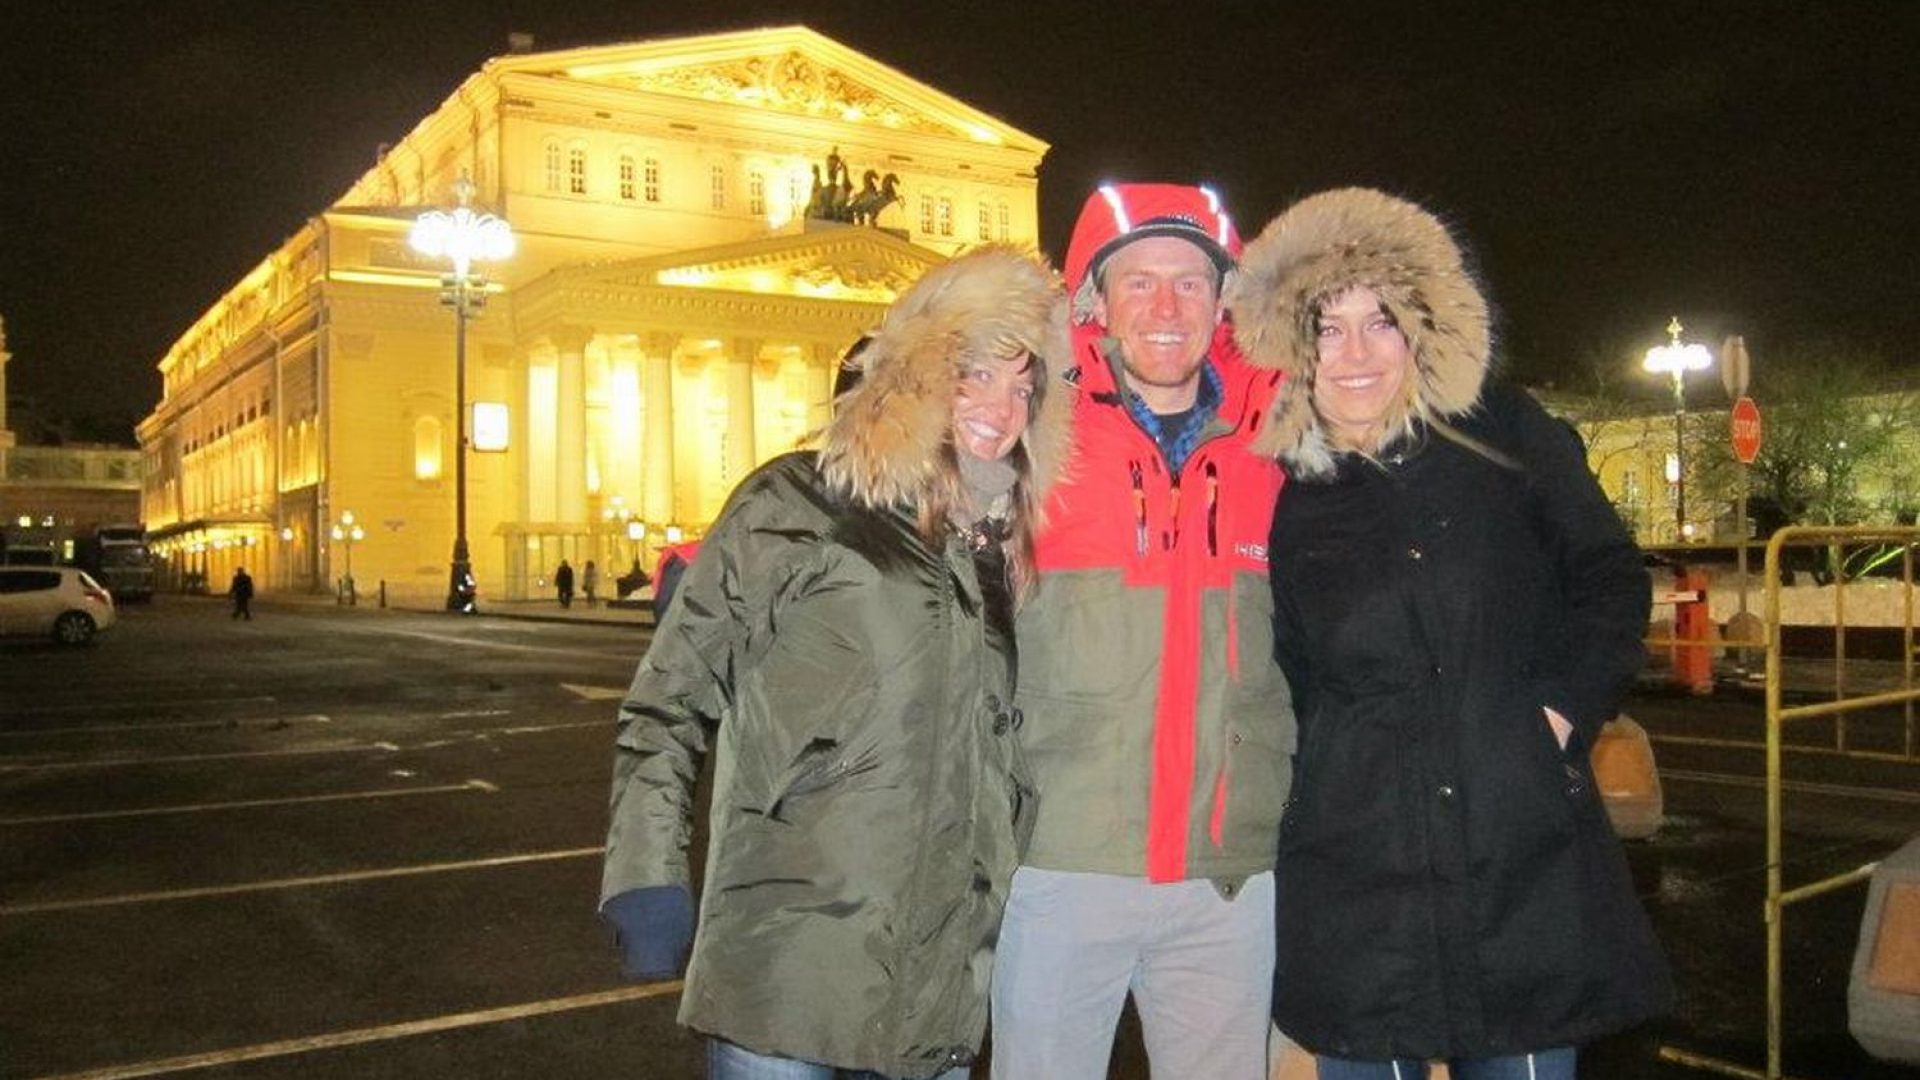 julia-mancuso-ted-ligety-and-lindsey-vonn-in-front-of-the-bolshoi-theater-in-moscow